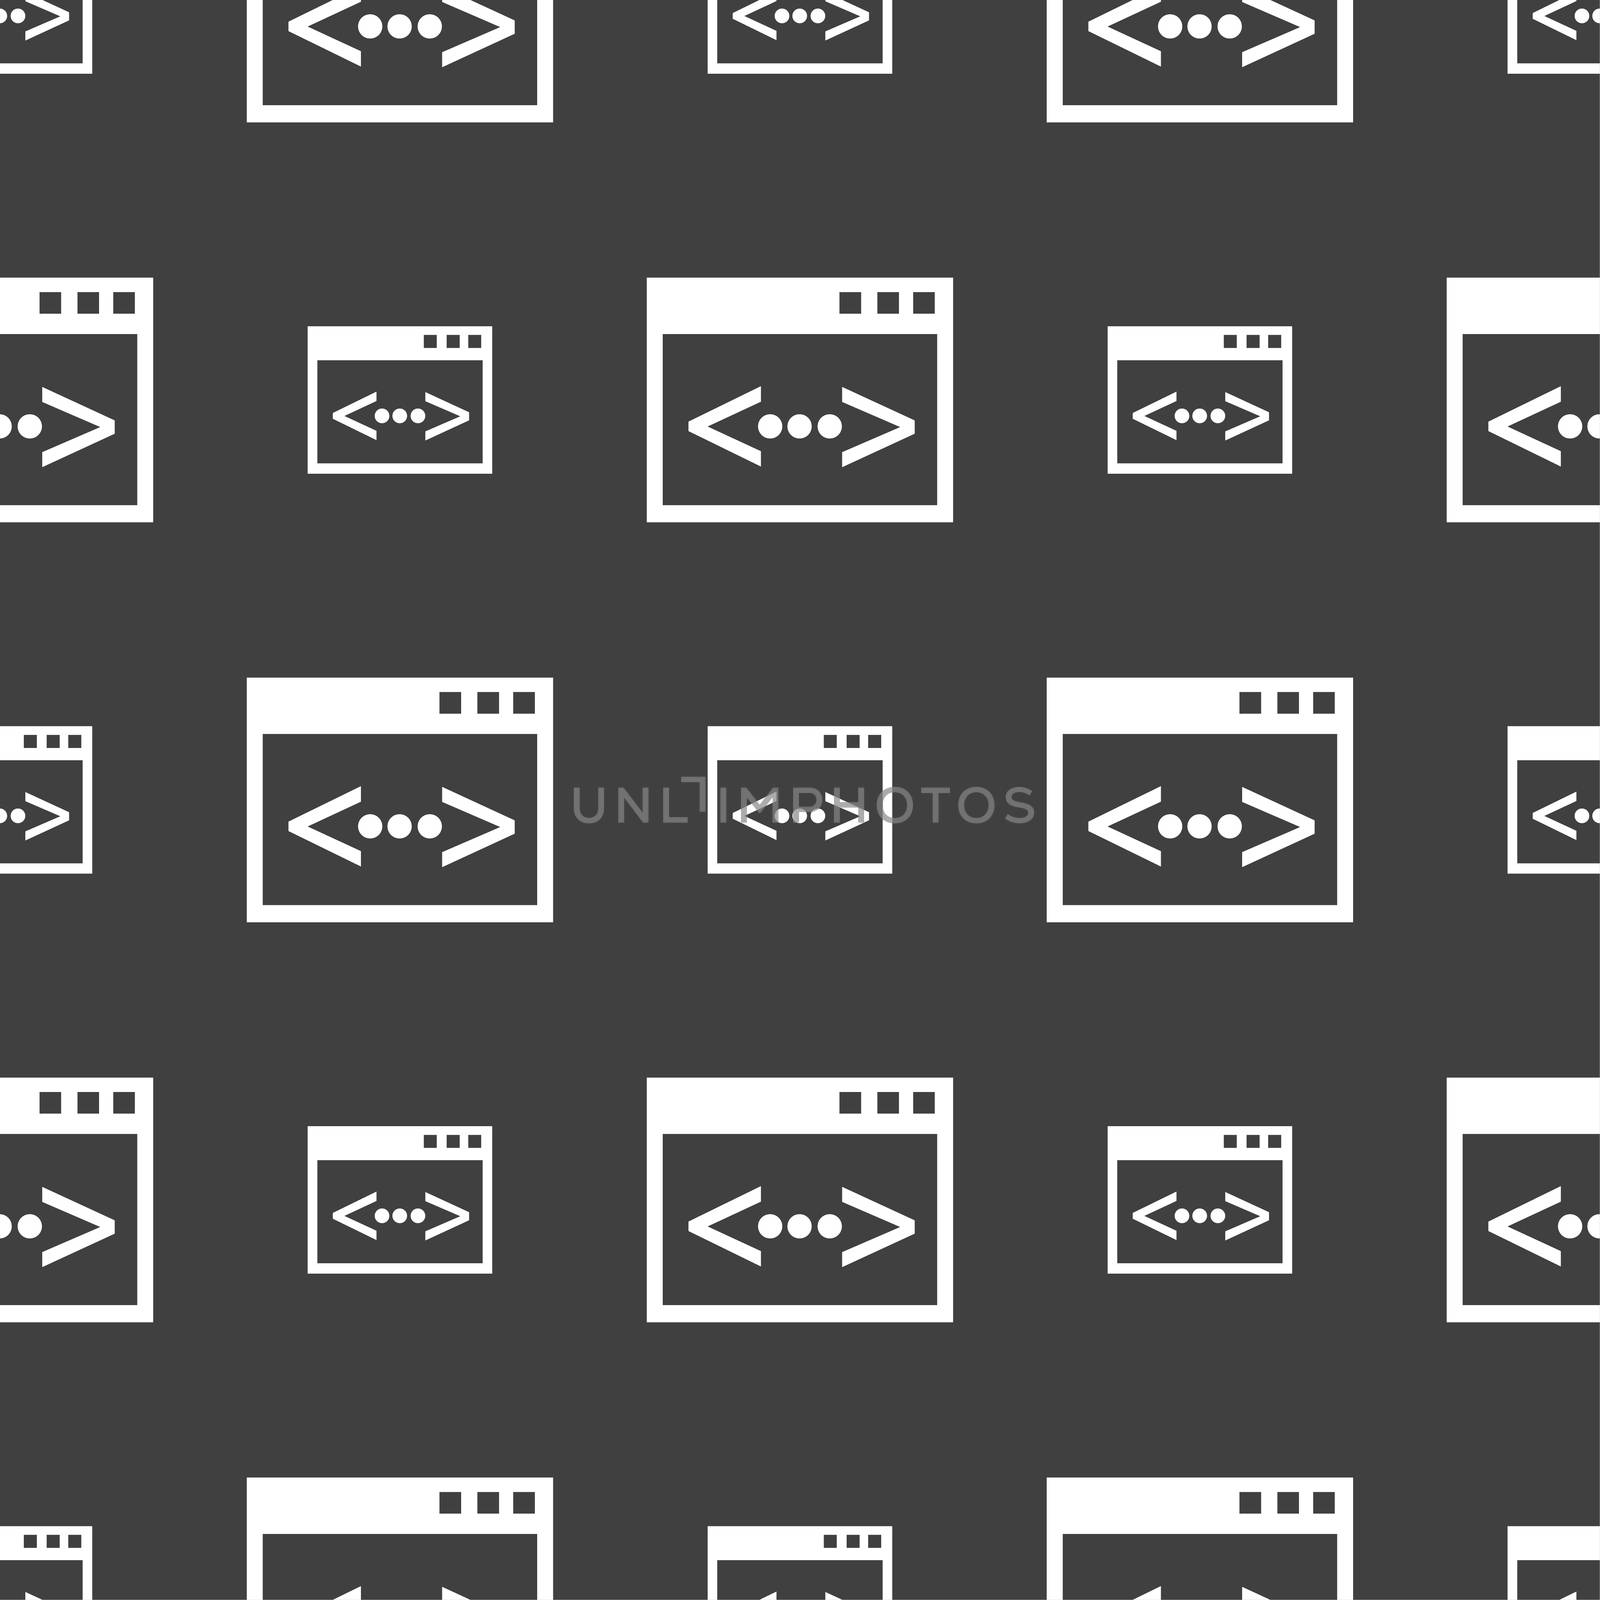 Code sign icon. Programmer symbol. Seamless pattern on a gray background. illustration